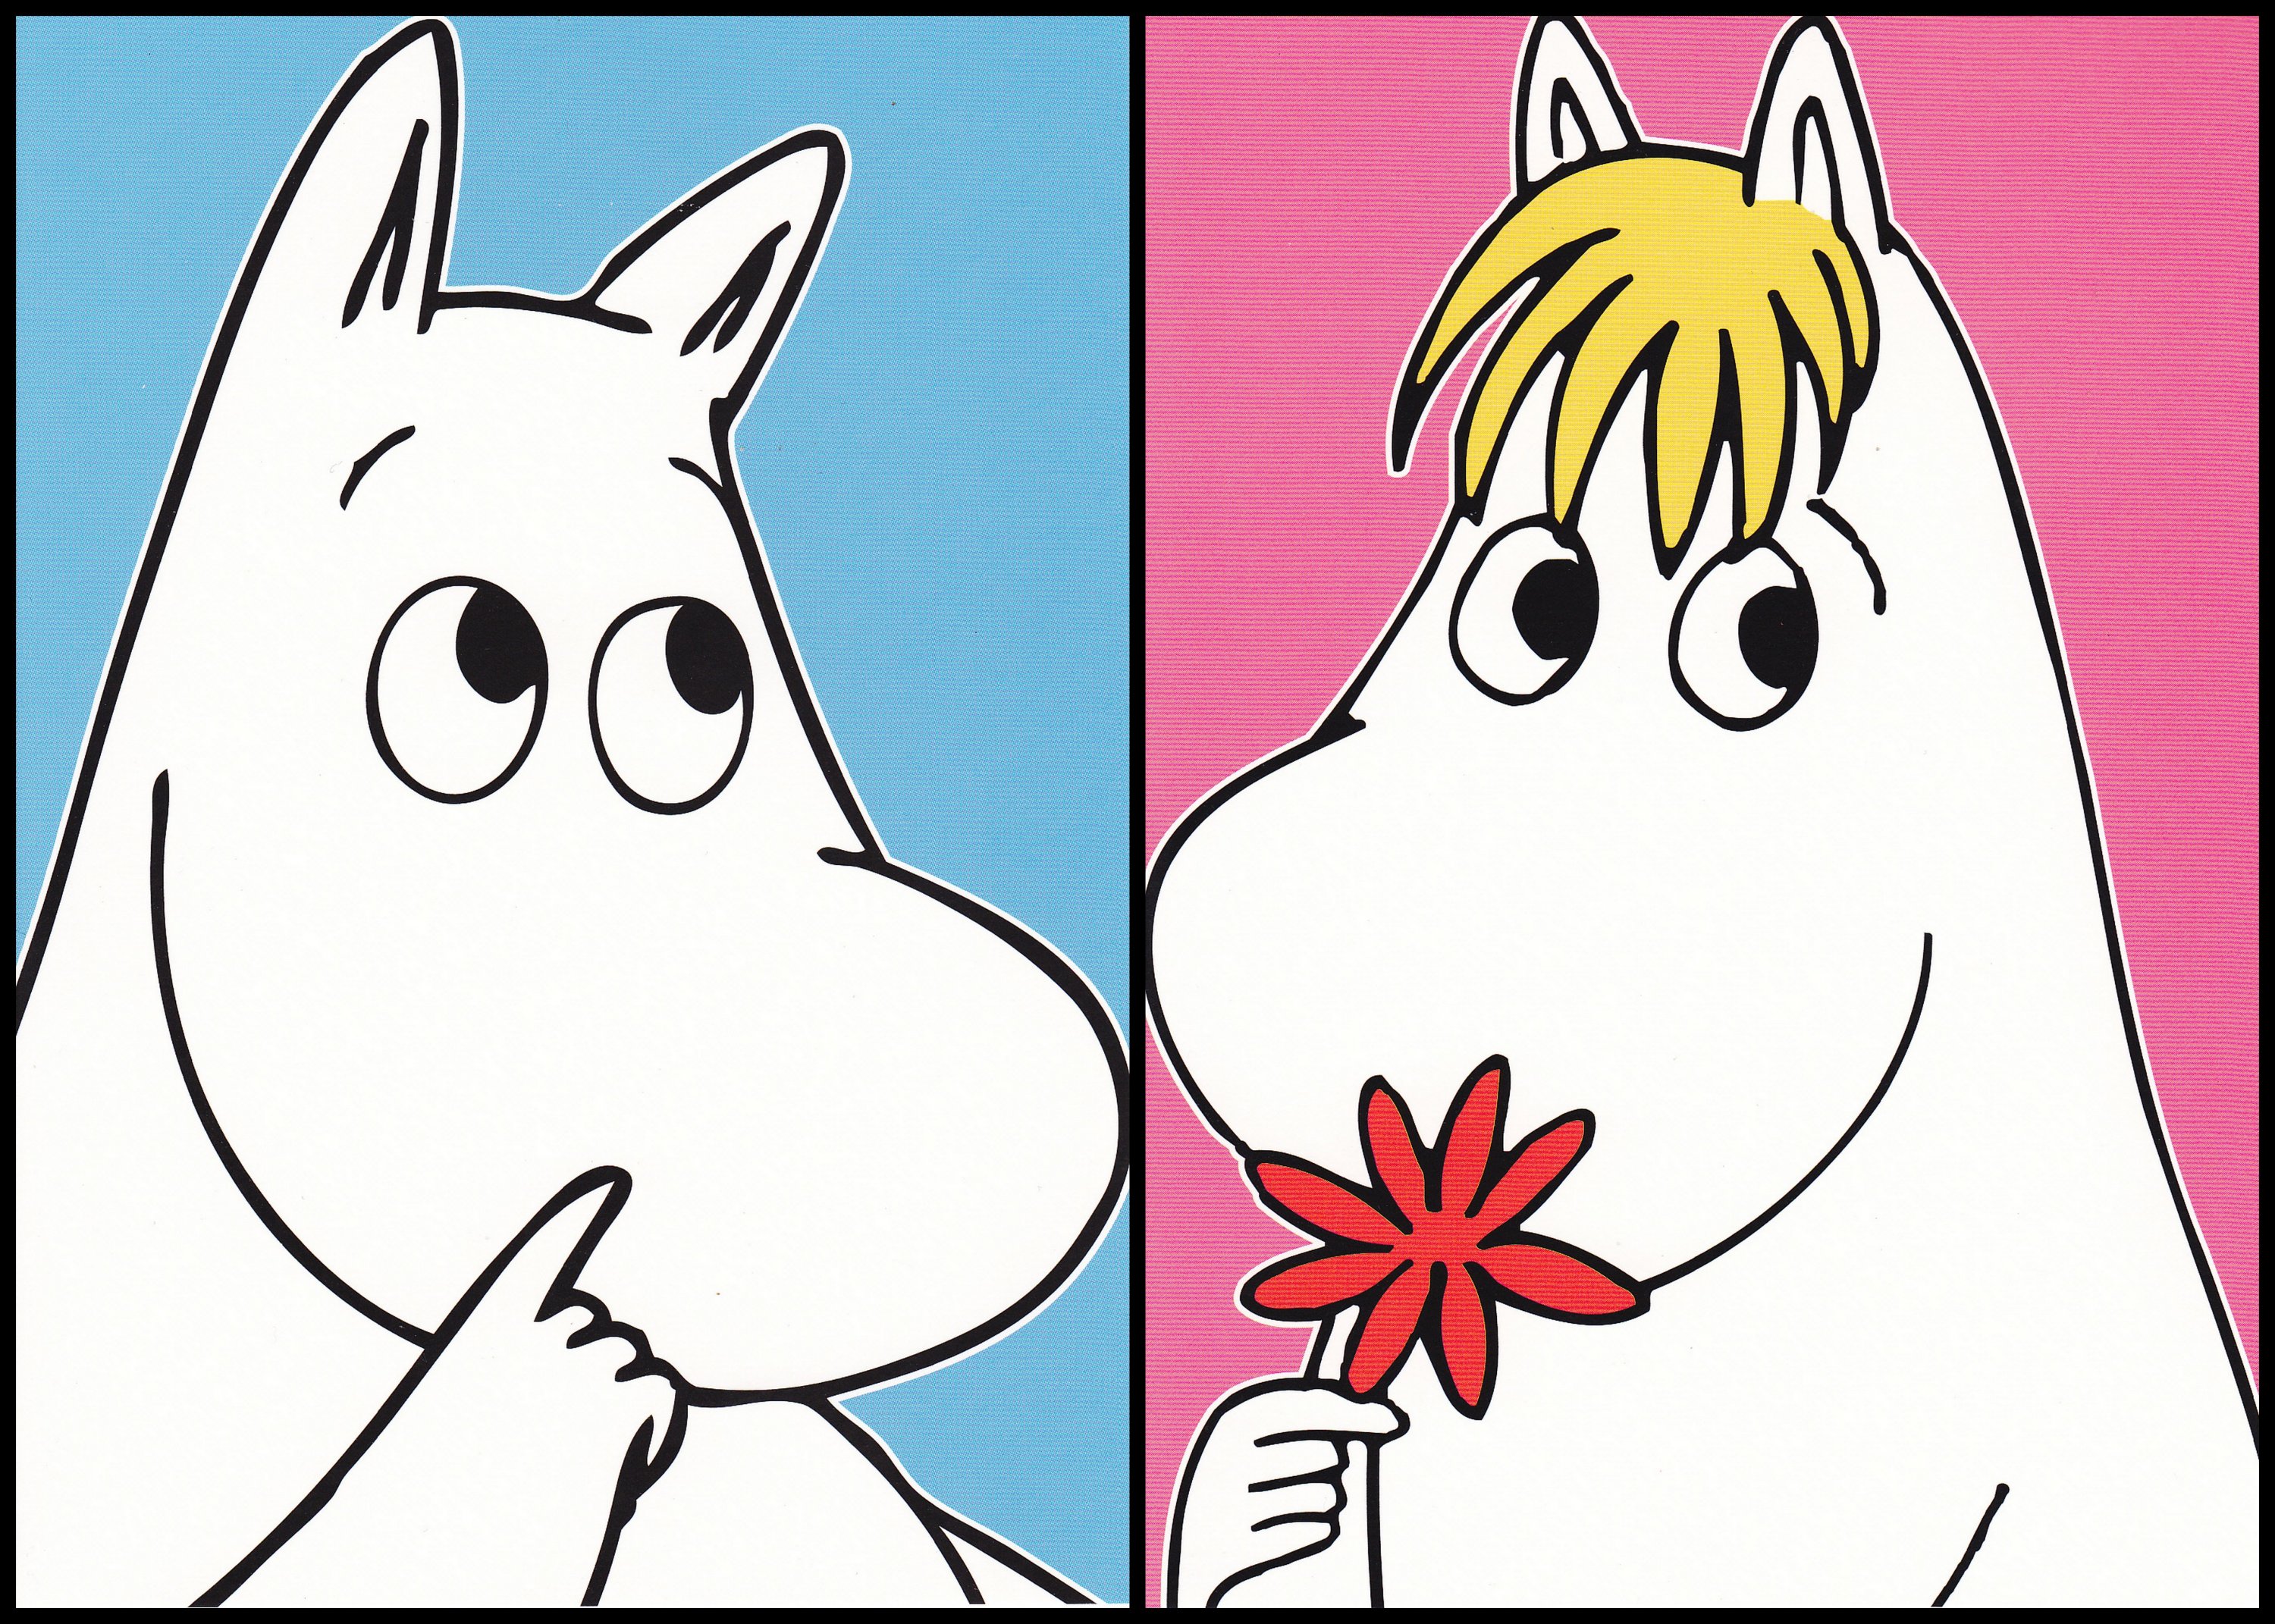 moomin_and_snorkmaiden_cards.jpg